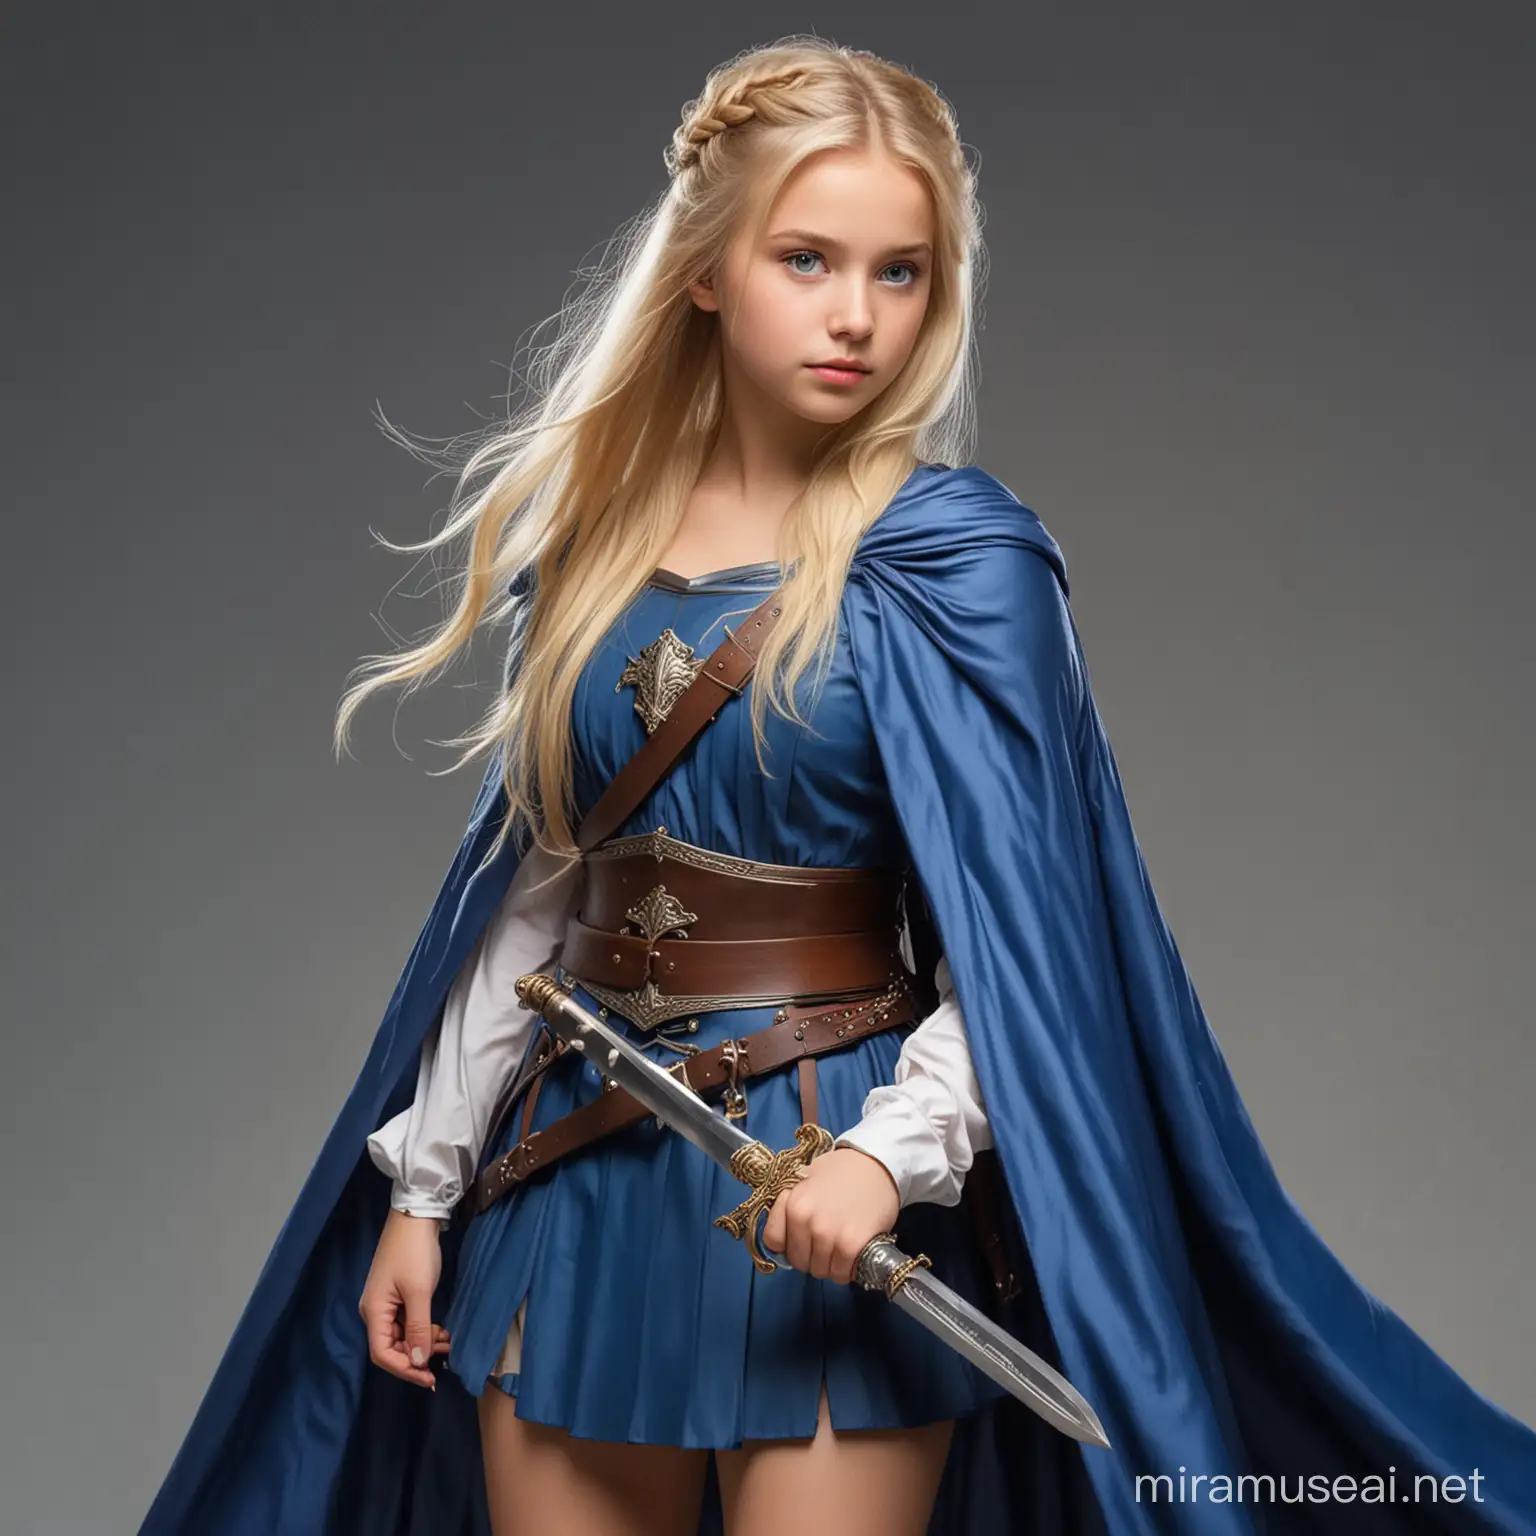 daughter of knight. She is attentive and kind young girl. Her hair is tied down with long blonde hair. She wearing blue cape and holding a sword. she also got belt around her waist with mini skirt